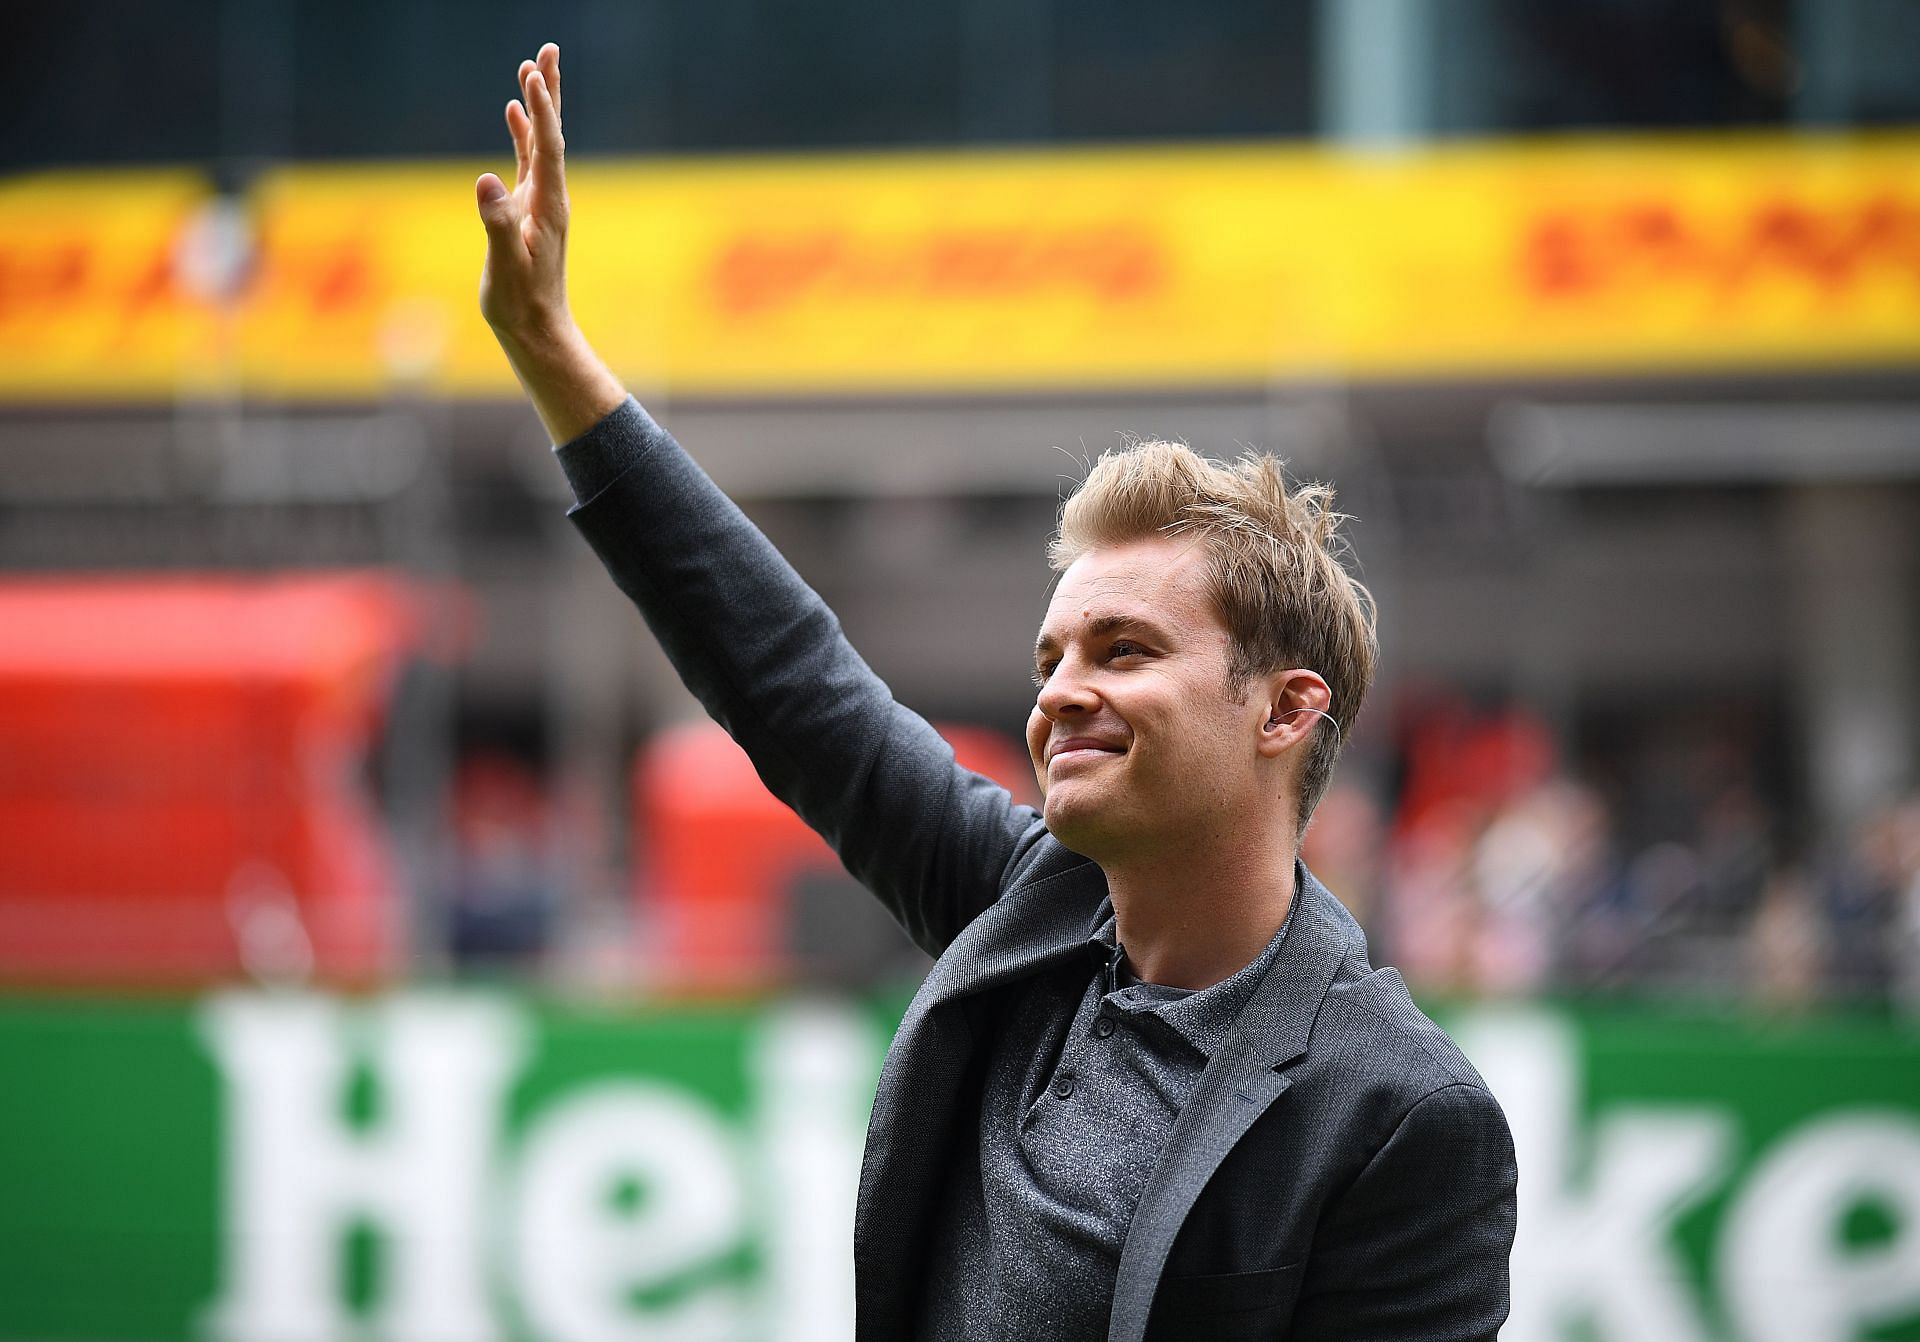 Nico Rosberg waves to the crowd before the F1 Grand Prix of China at Shanghai International Circuit on April 14, 2019, in Shanghai, China (Photo by Clive Mason/Getty Images)